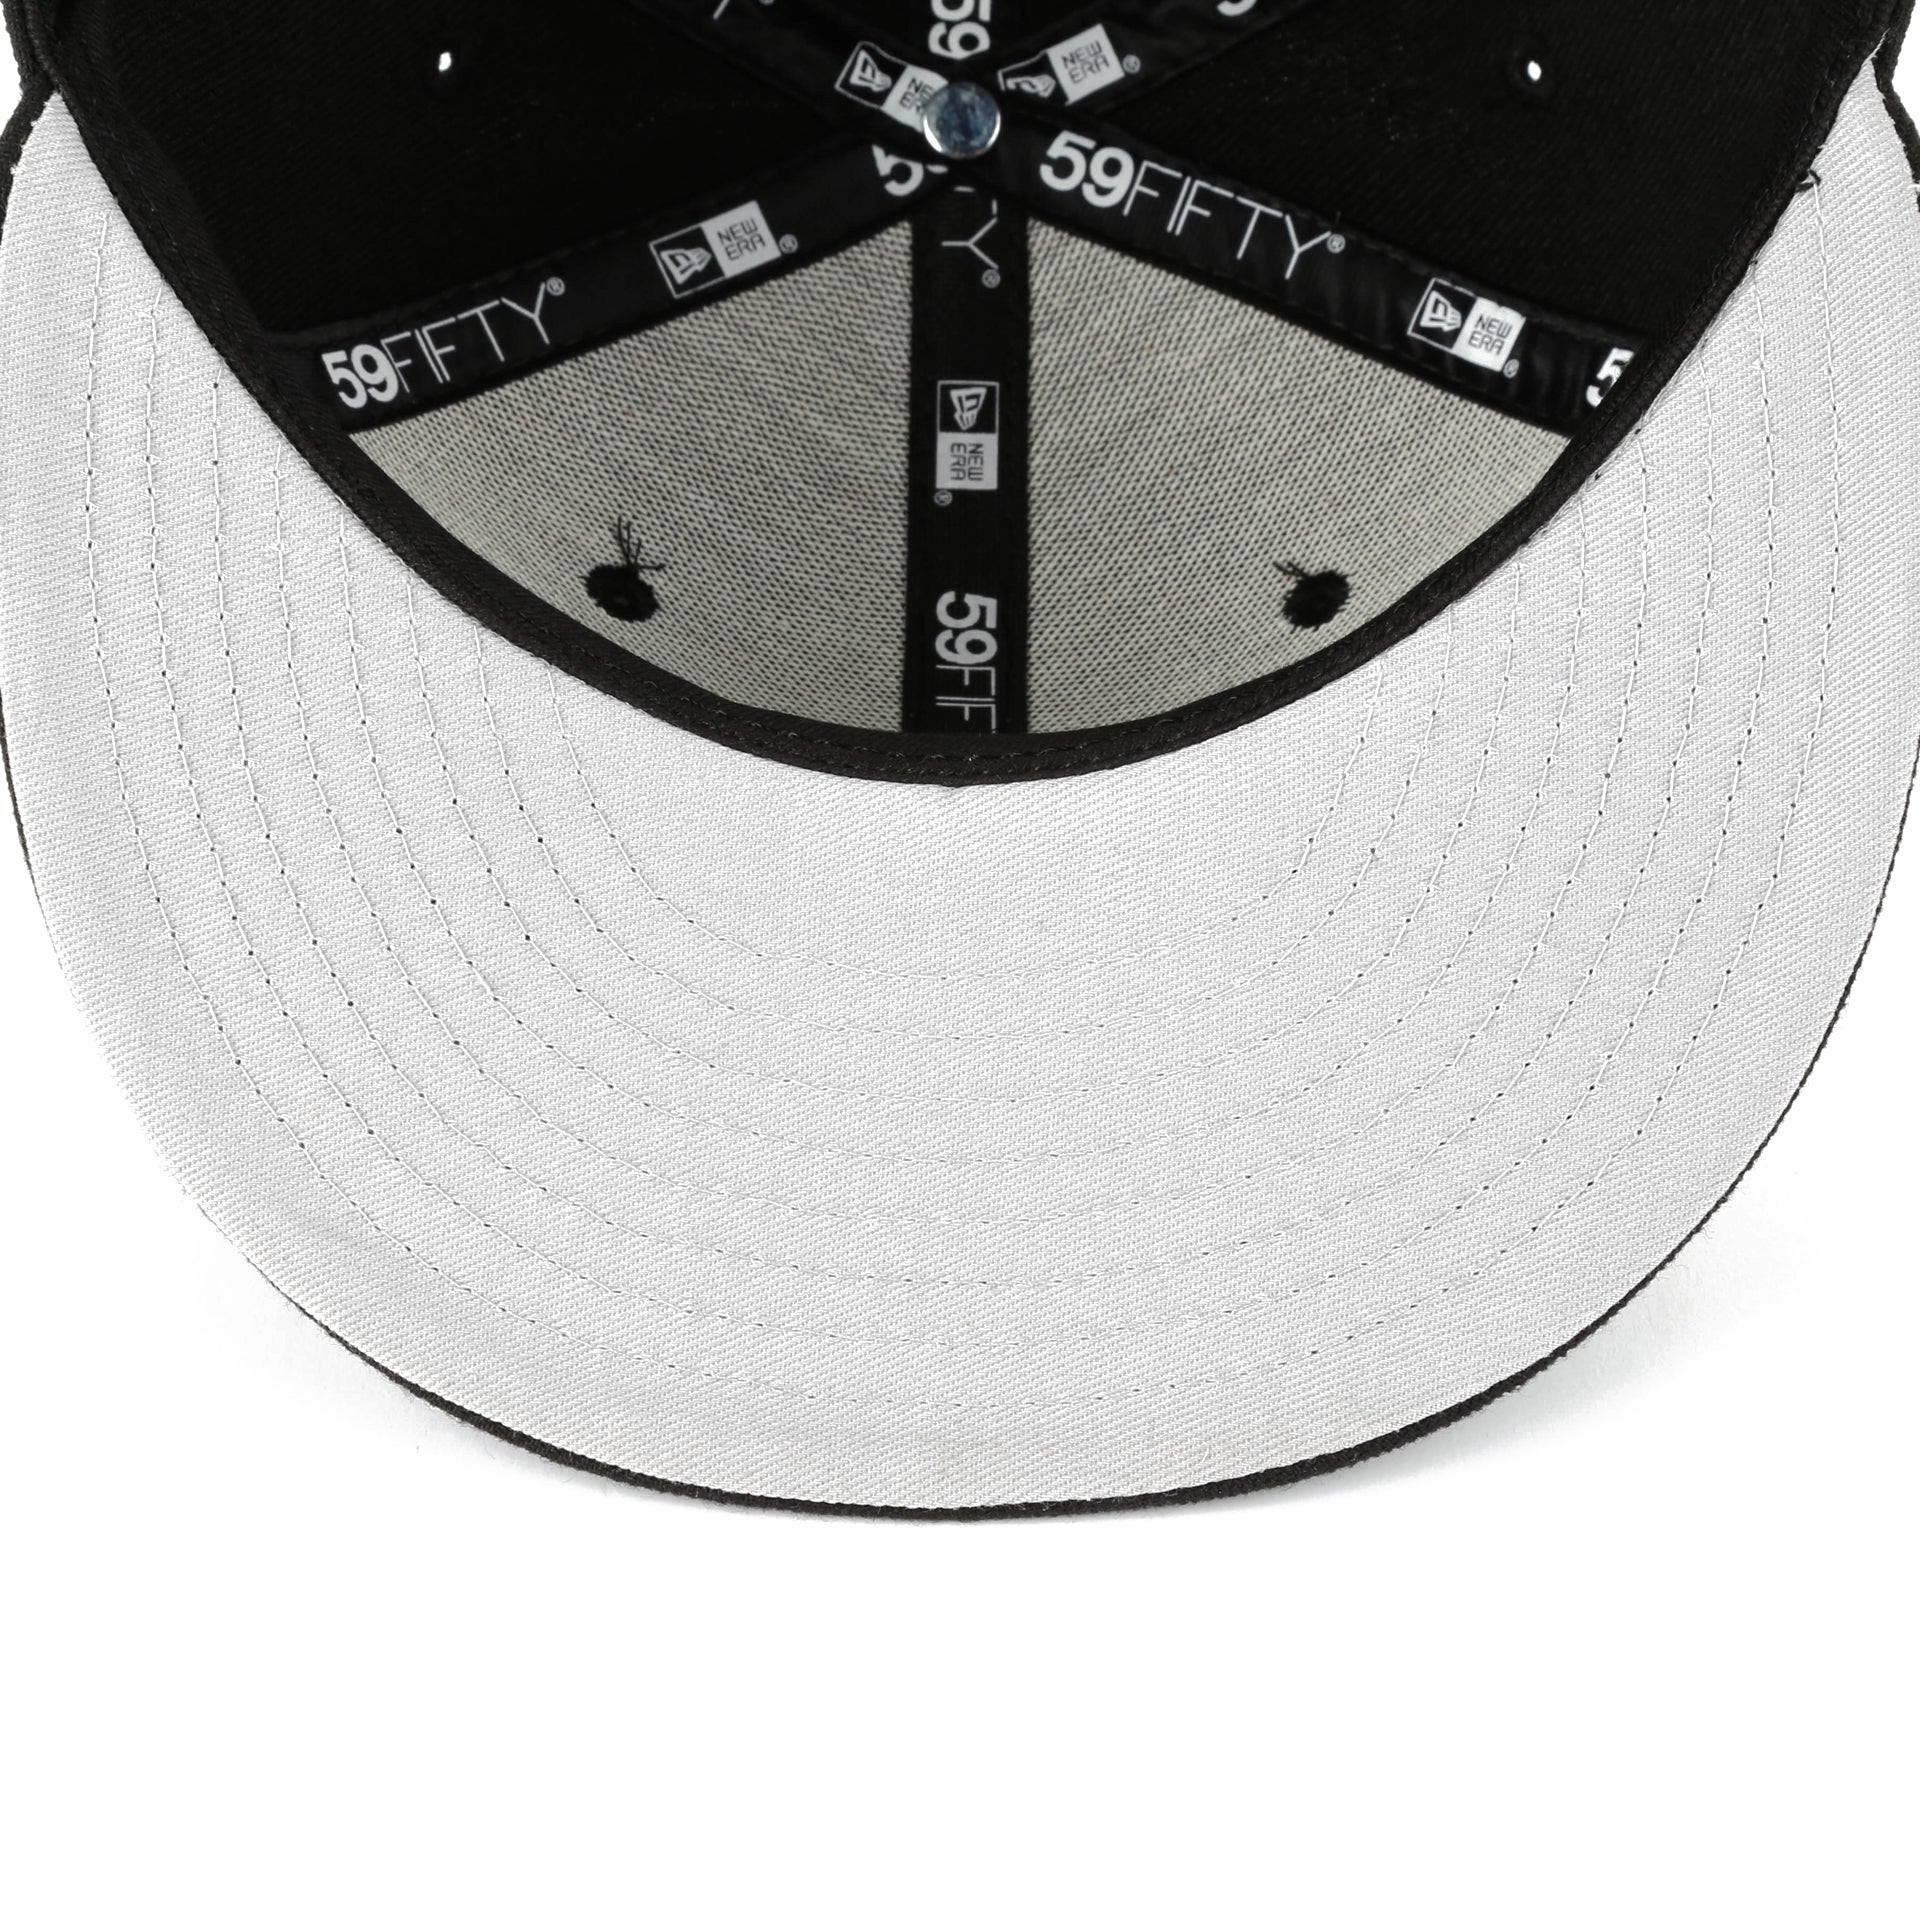 New Era 59Fifty MLB Basic Fitted Cap - Los Angeles Dodgers/Black - New Star